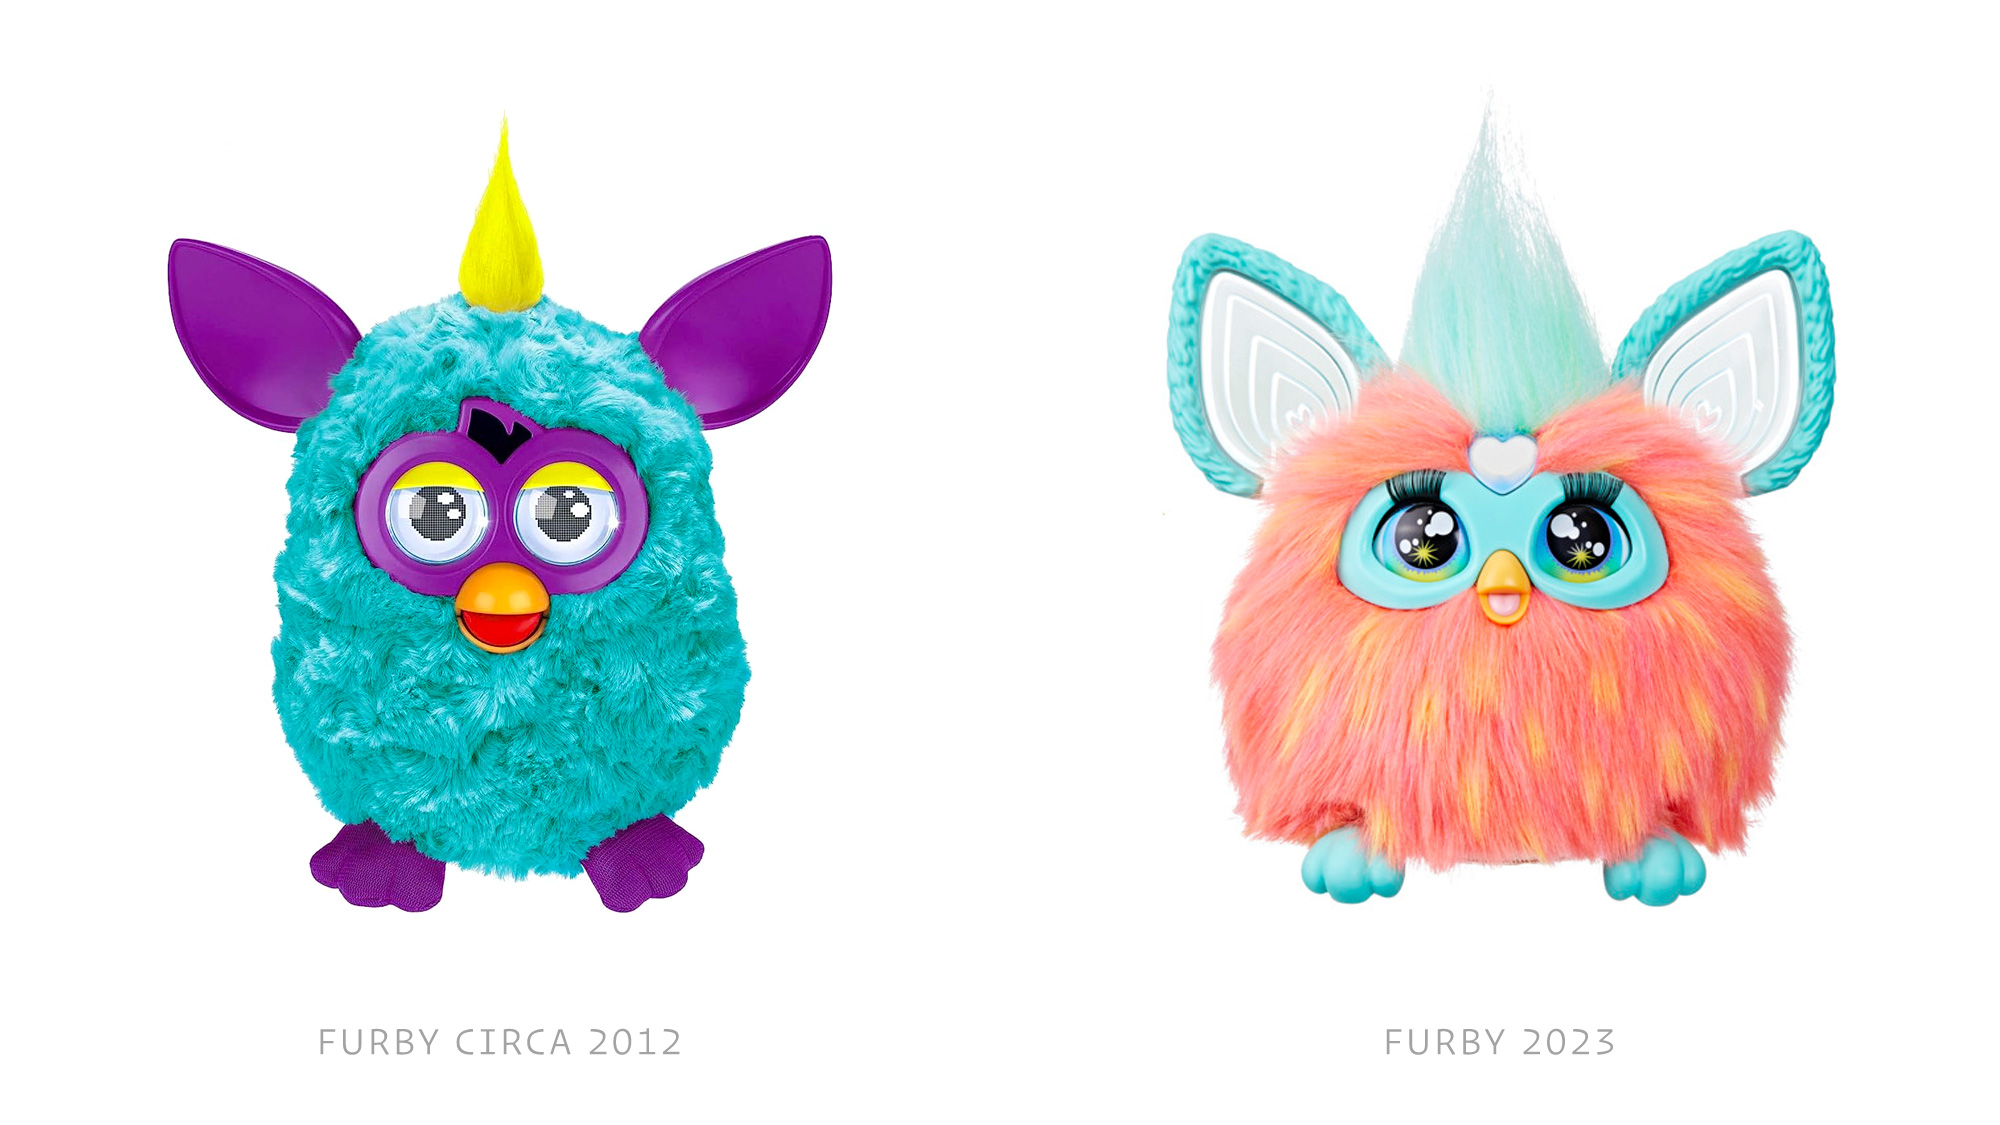 Brand New: Don't Worry, Furby Happy